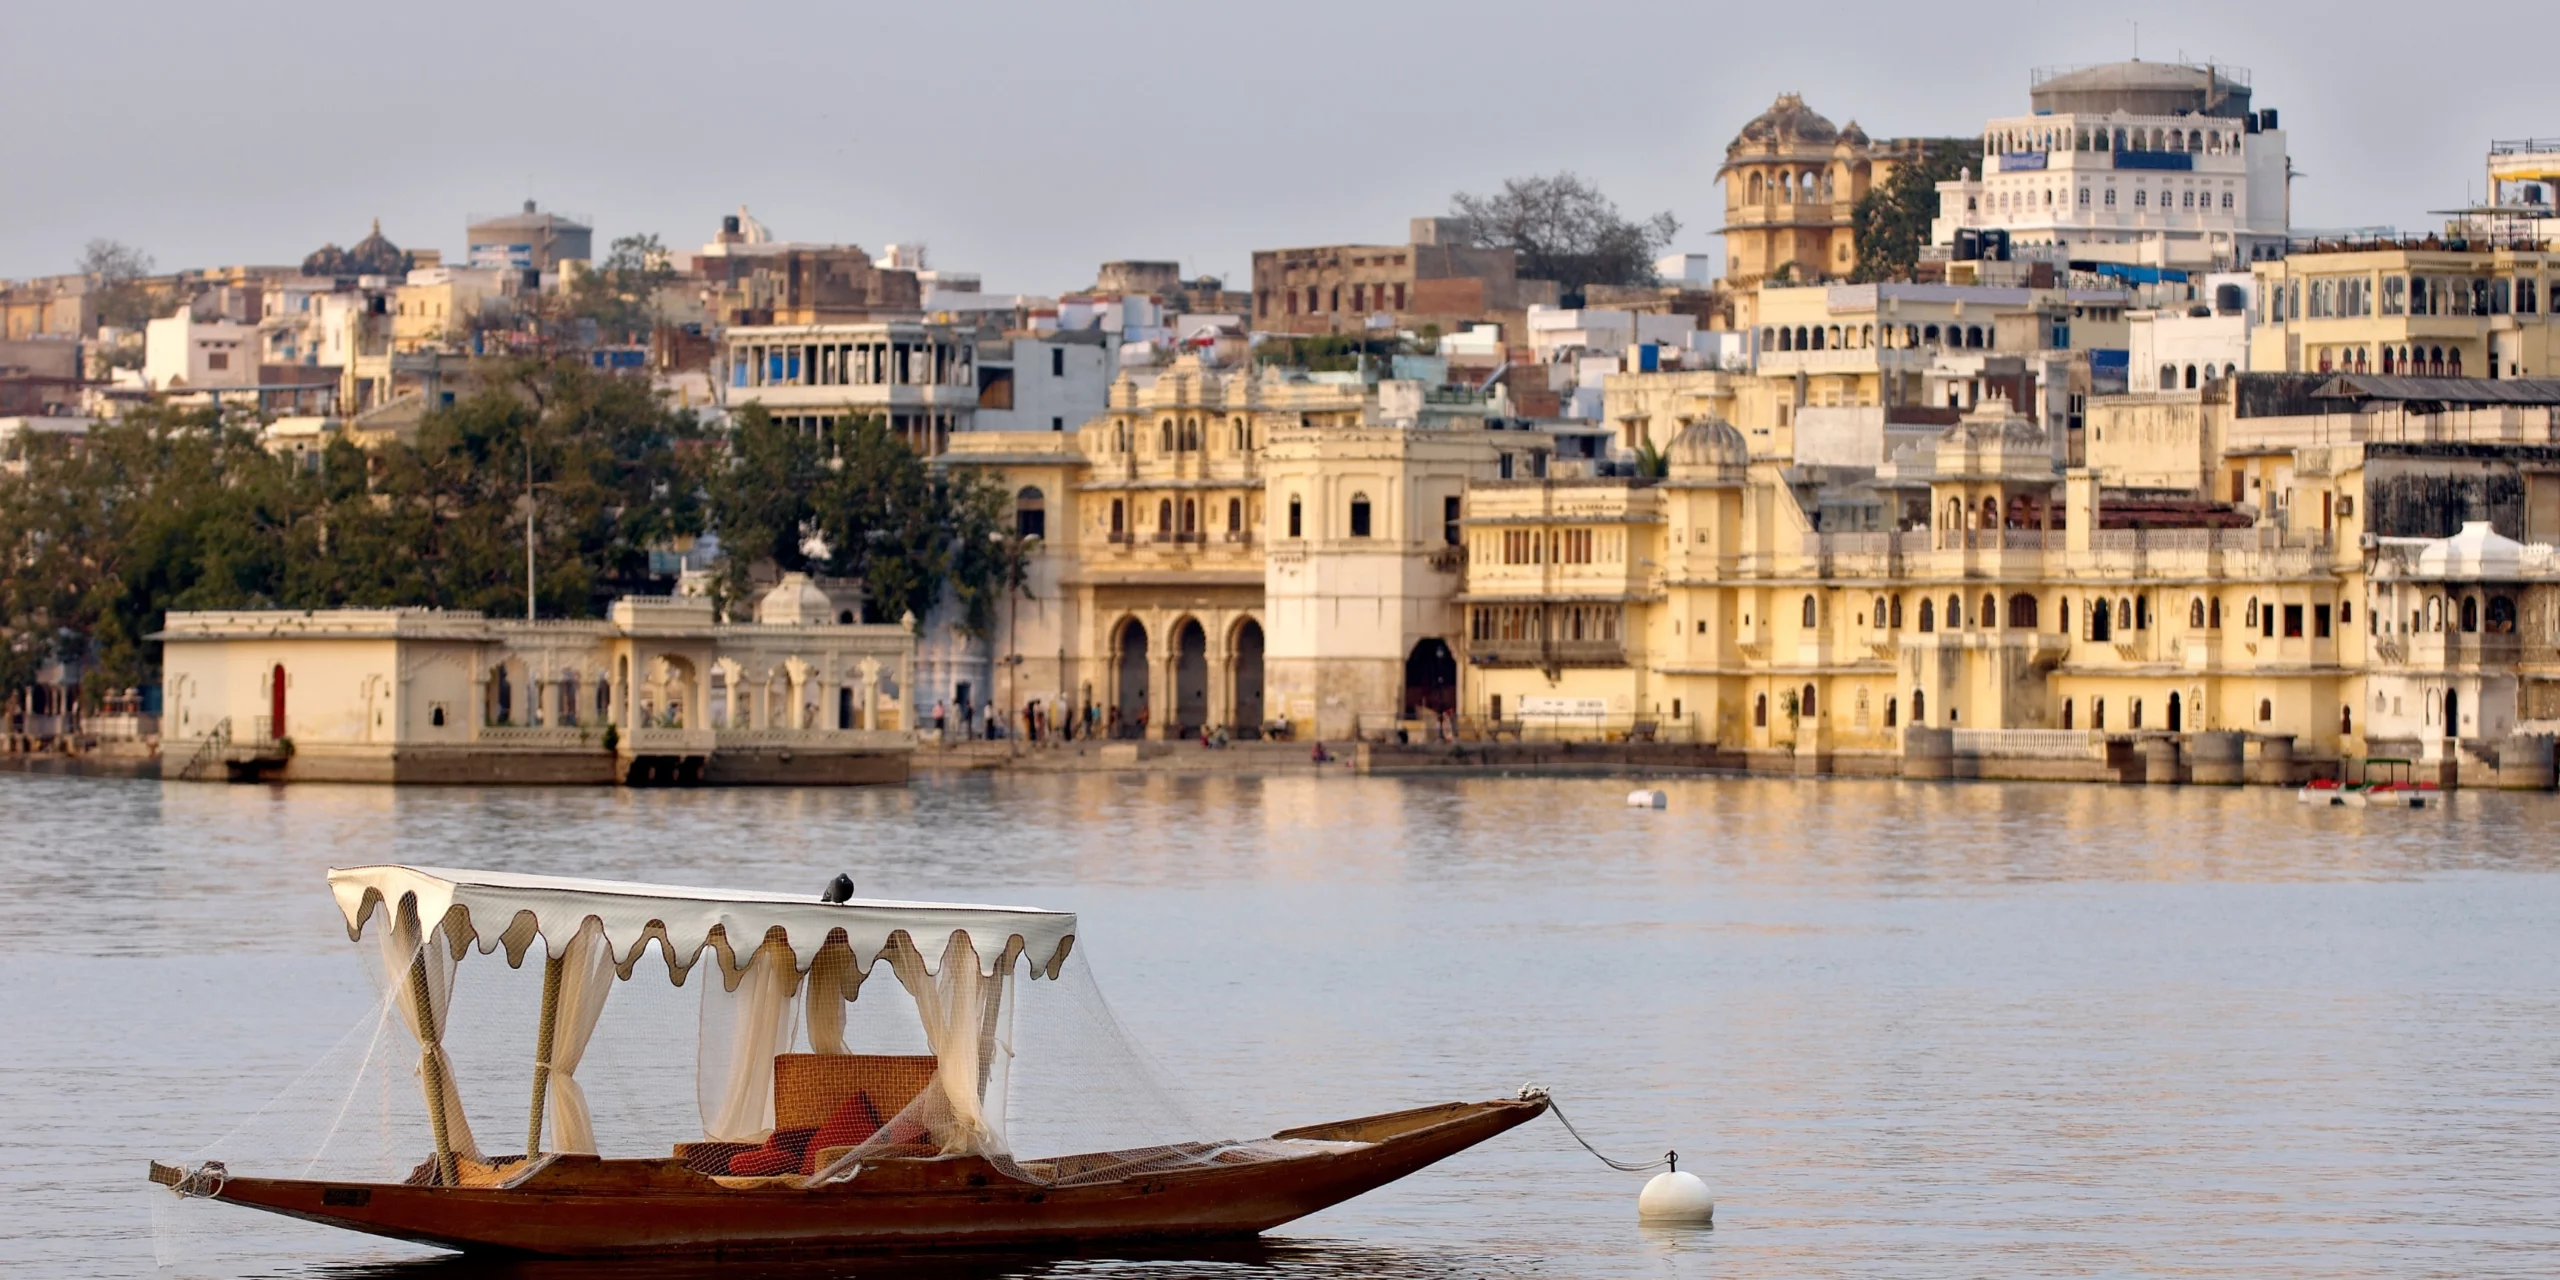 Golden Triangle Tour with Udaipur: A Fascinating Journey through India’s Rich Legacy